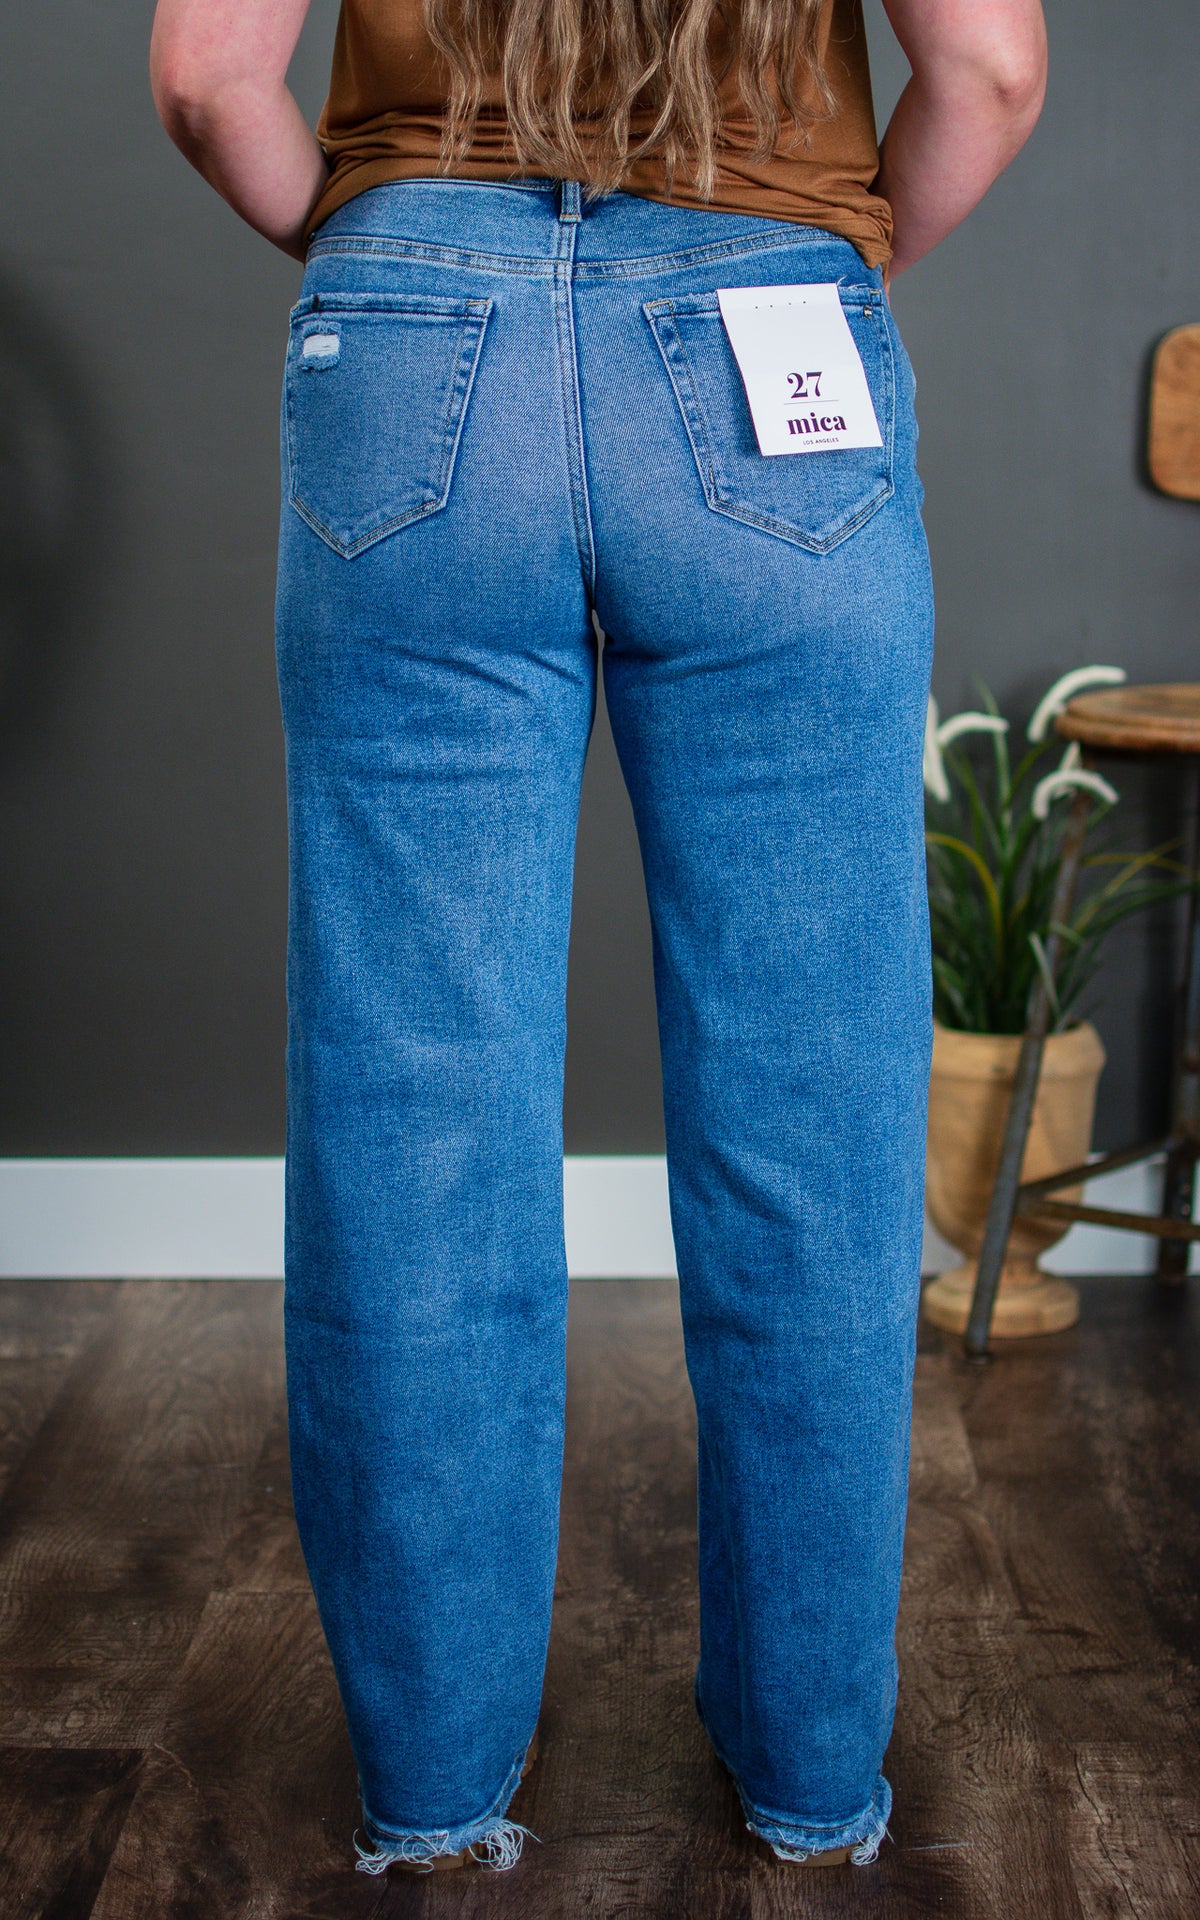 Gallimard Mica Jeans